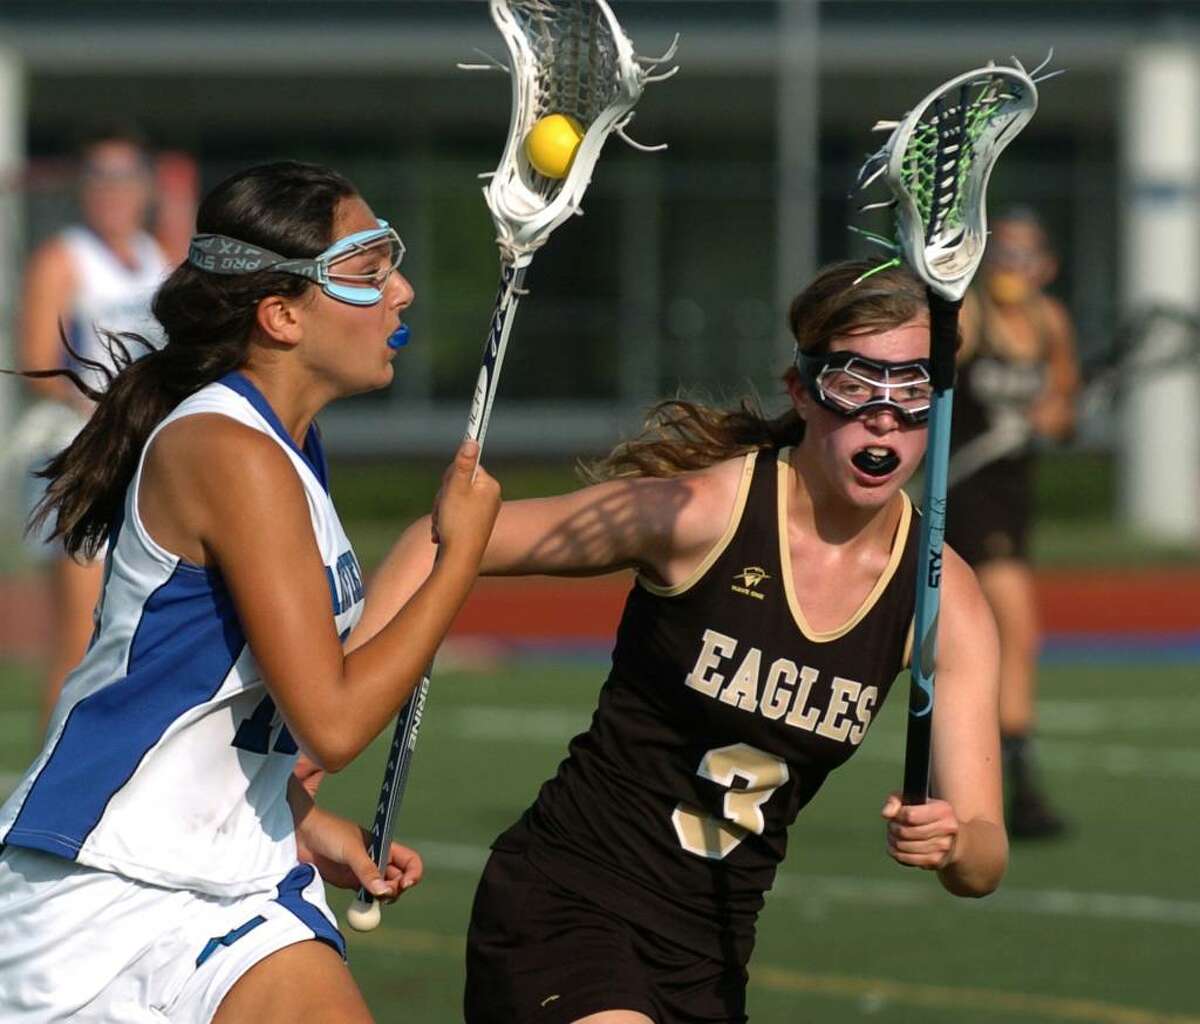 Fairfield Ludlowe's #13 Stephanie Gorab, left, carries the ball as Trumbull's #3 Keri Mahoney looks to intercept, during CIAC first round lacrosse action in Fairfield, Conn. on Thursday June 03, 2010.